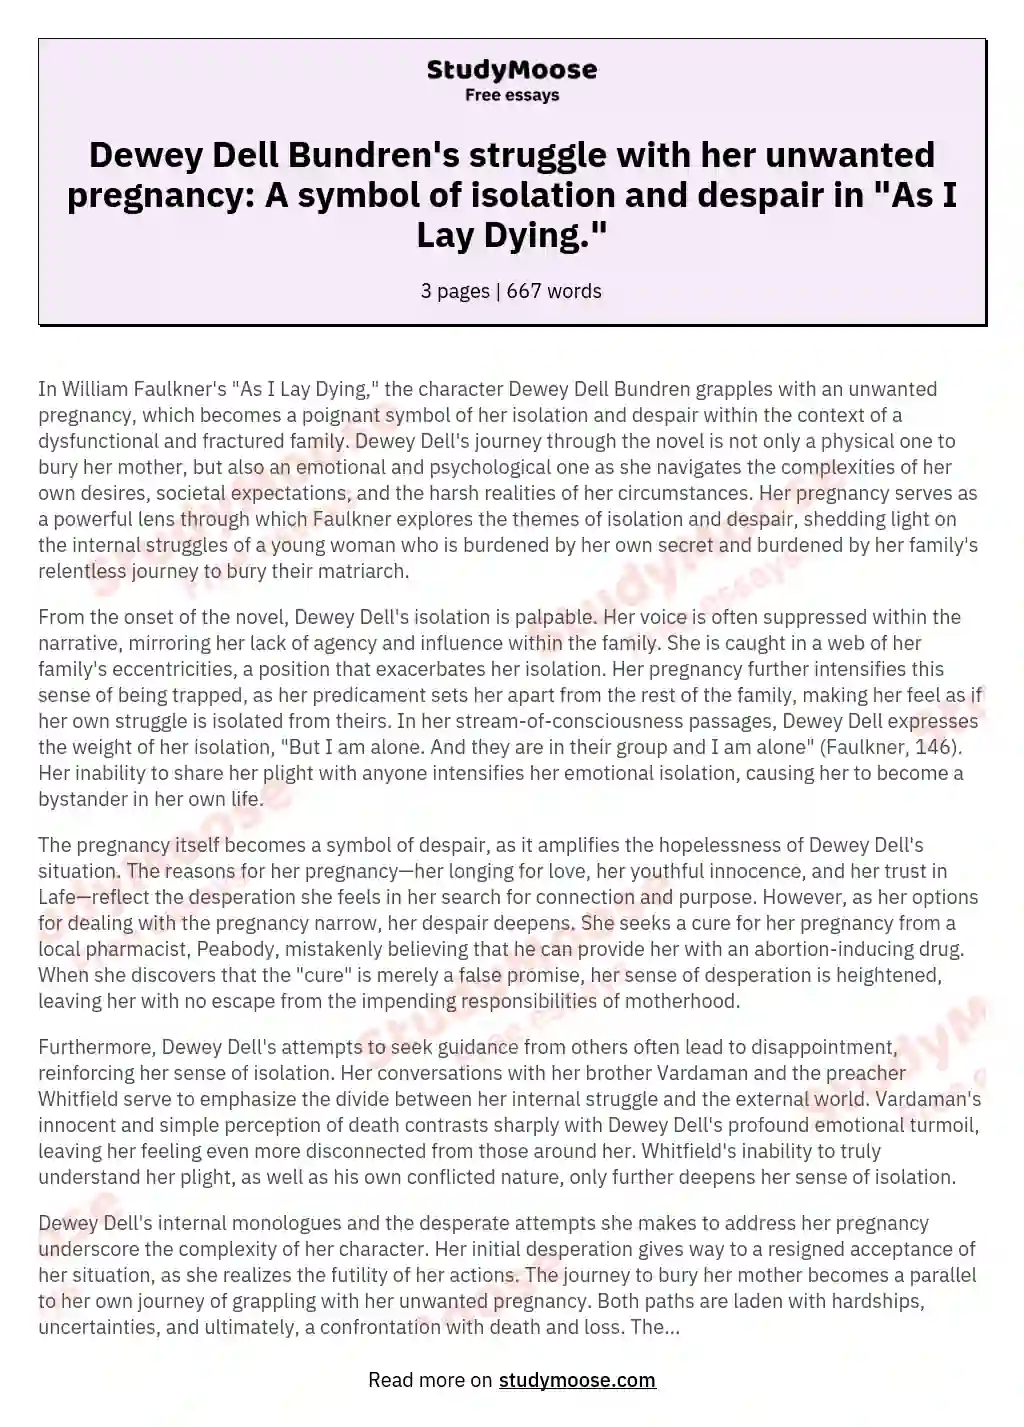 Dewey Dell Bundren's struggle with her unwanted pregnancy: A symbol of isolation and despair in "As I Lay Dying." essay